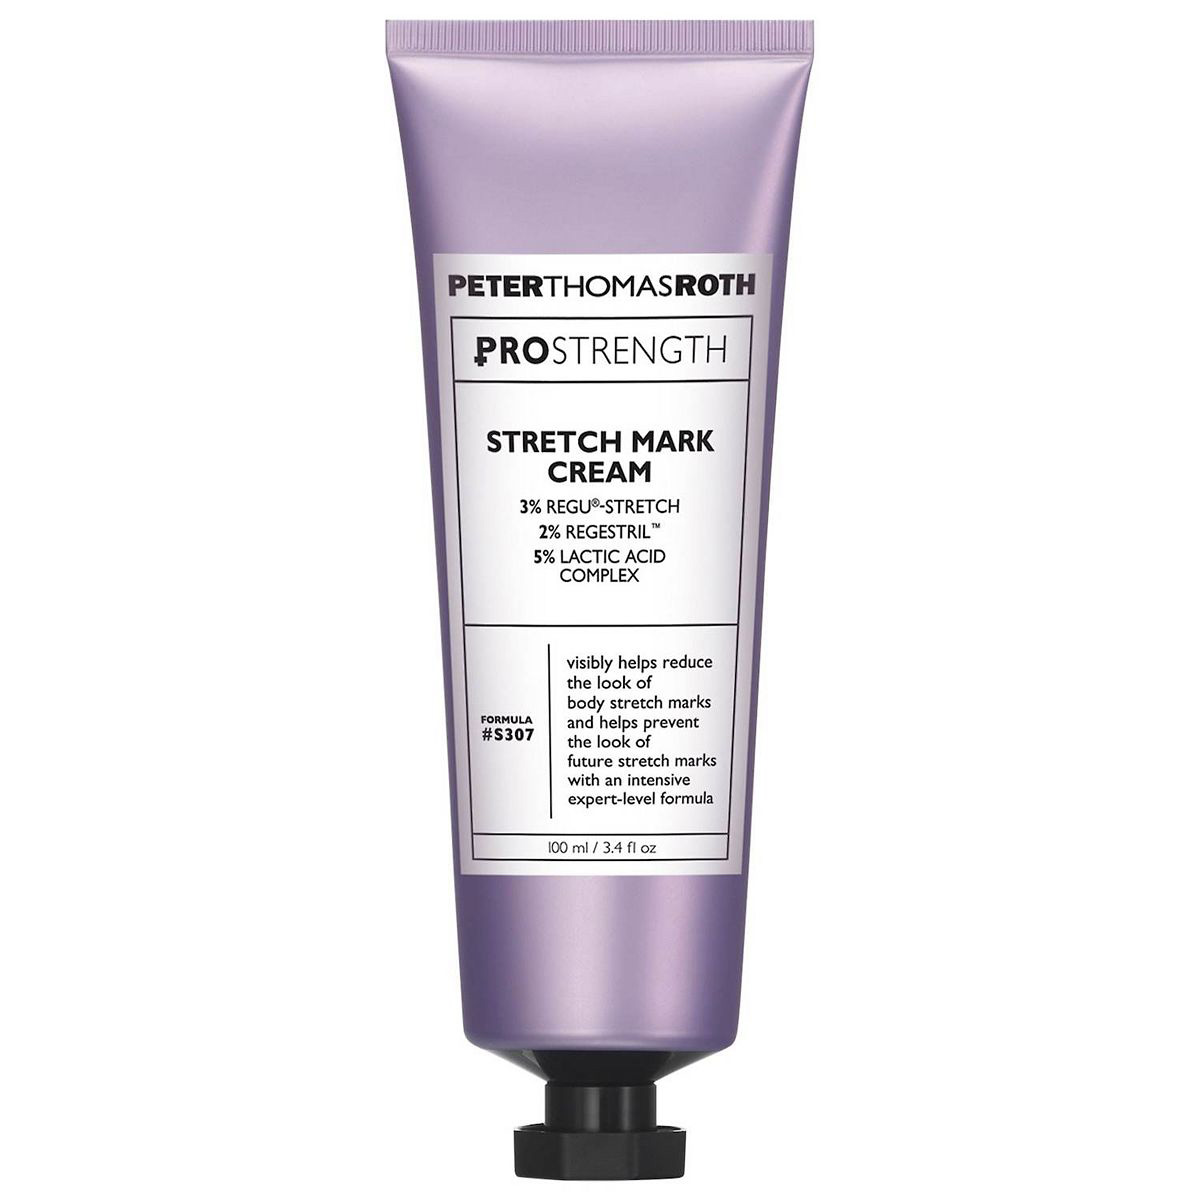 a bottle of Peter Thomas Roth PRO Strength Stretch Mark Cream